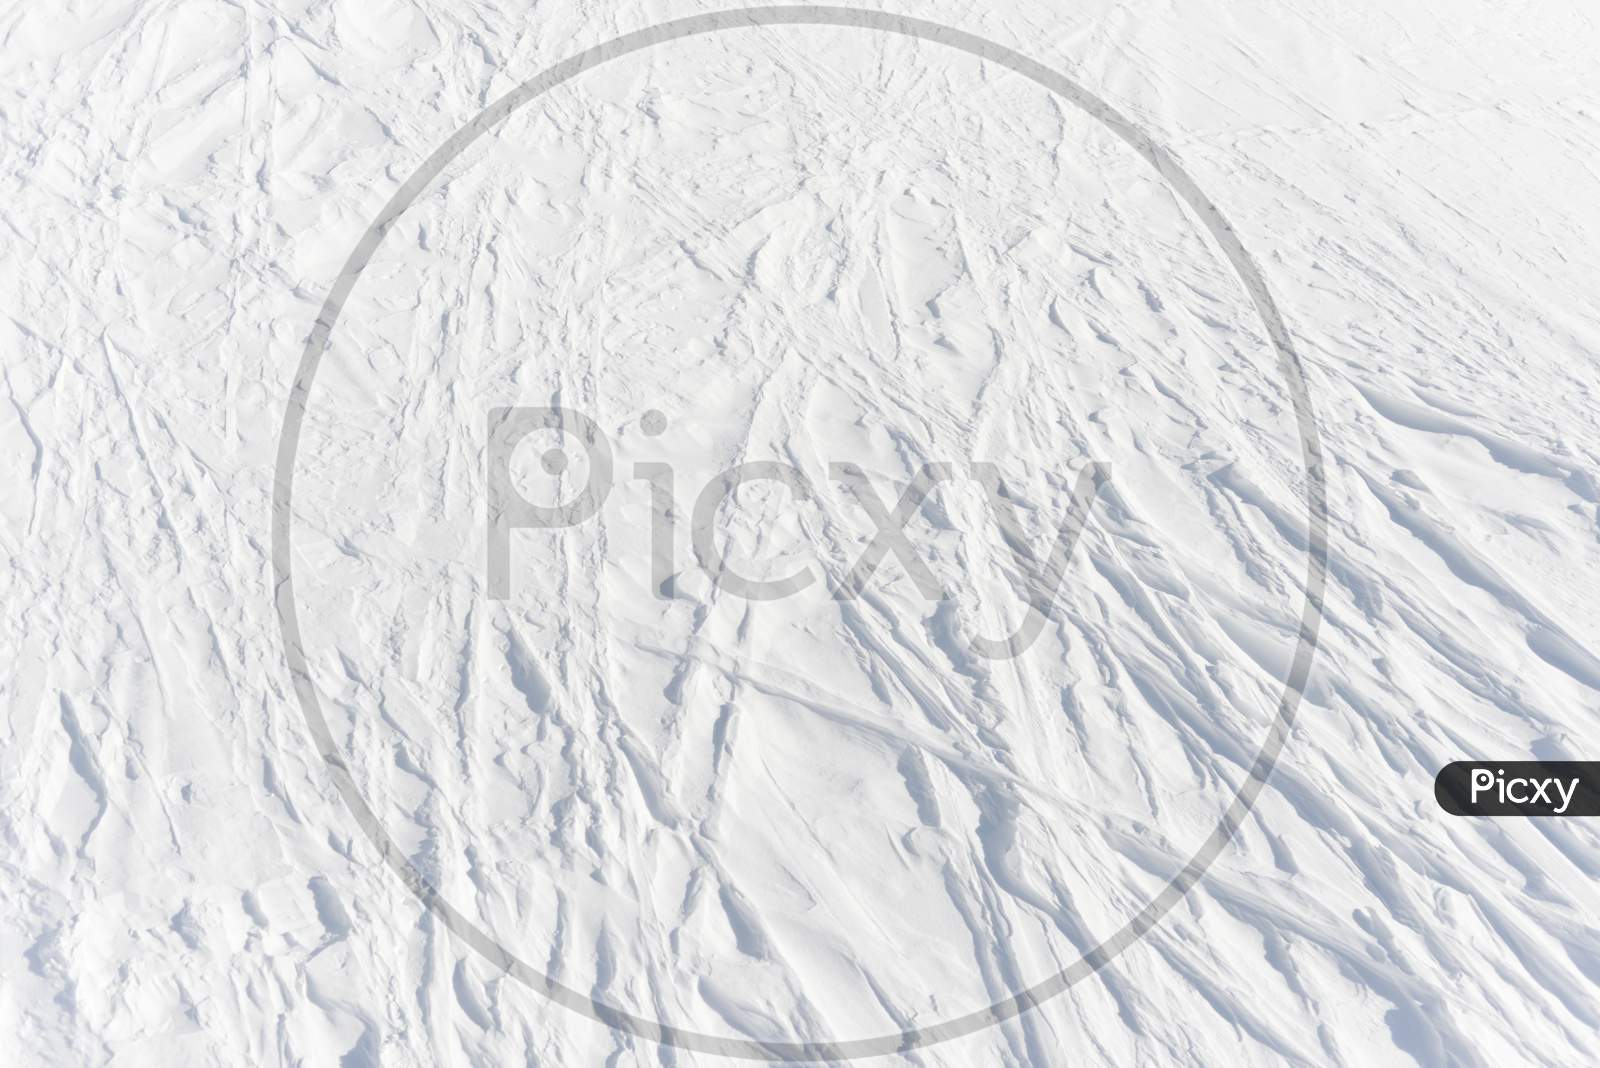 Snow Texture 3 - Crossing Ski Tracks Multitude Patchwork Or Intersections